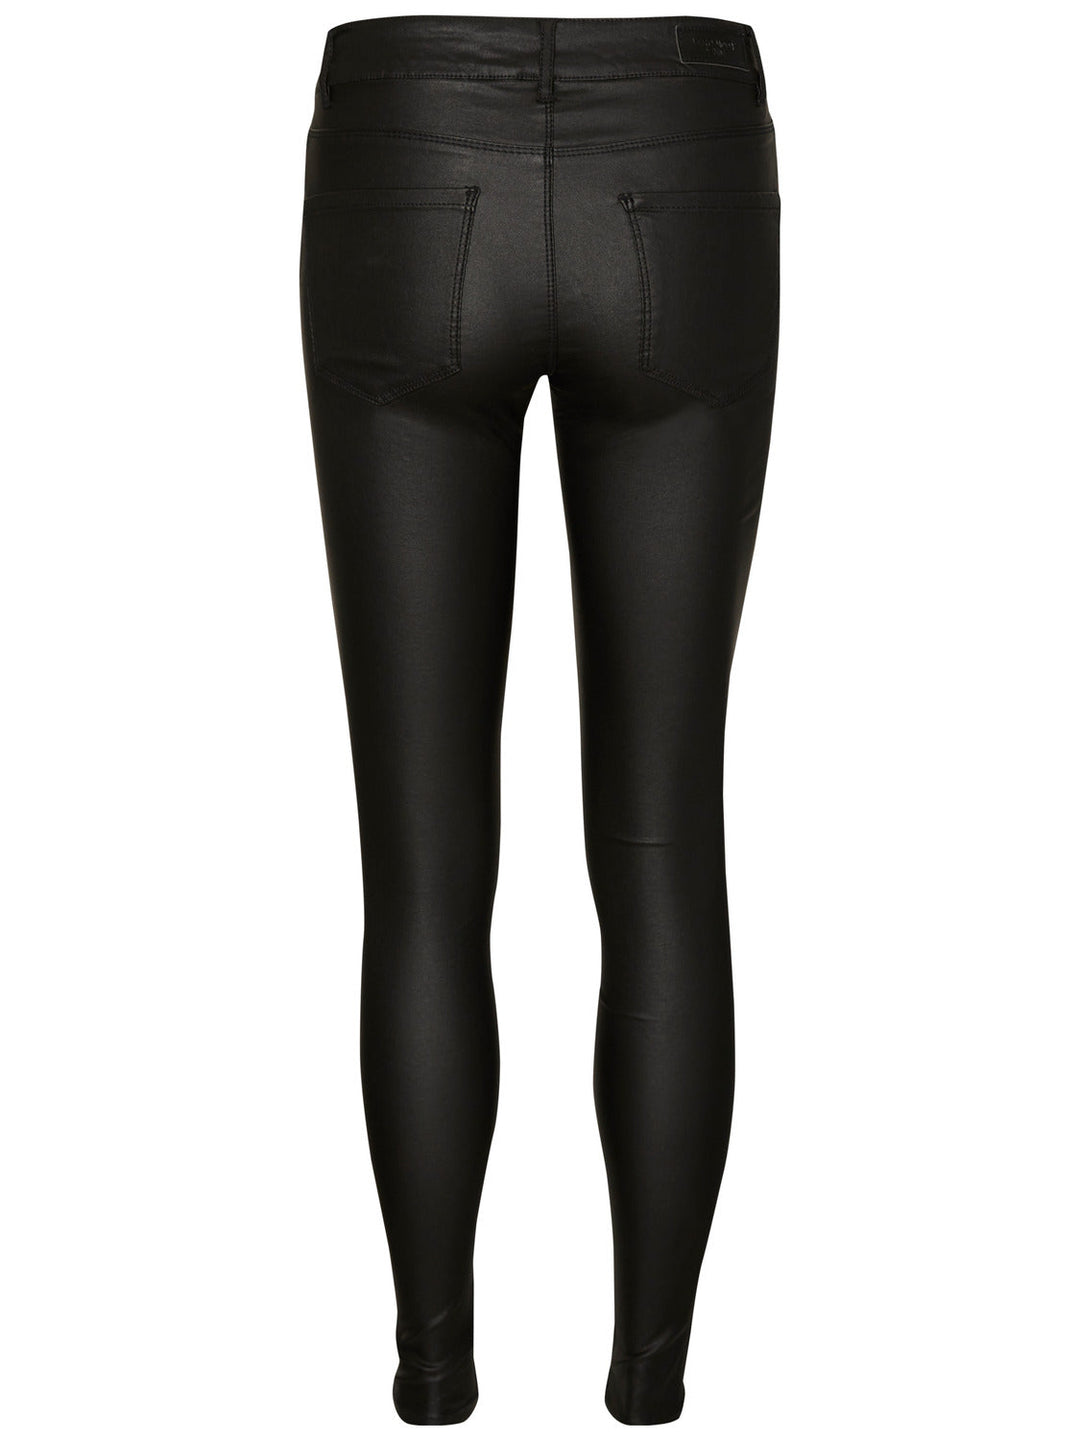 Vero Moda, Vmseven Nw Ss Smooth Coated Pants, Black COATED